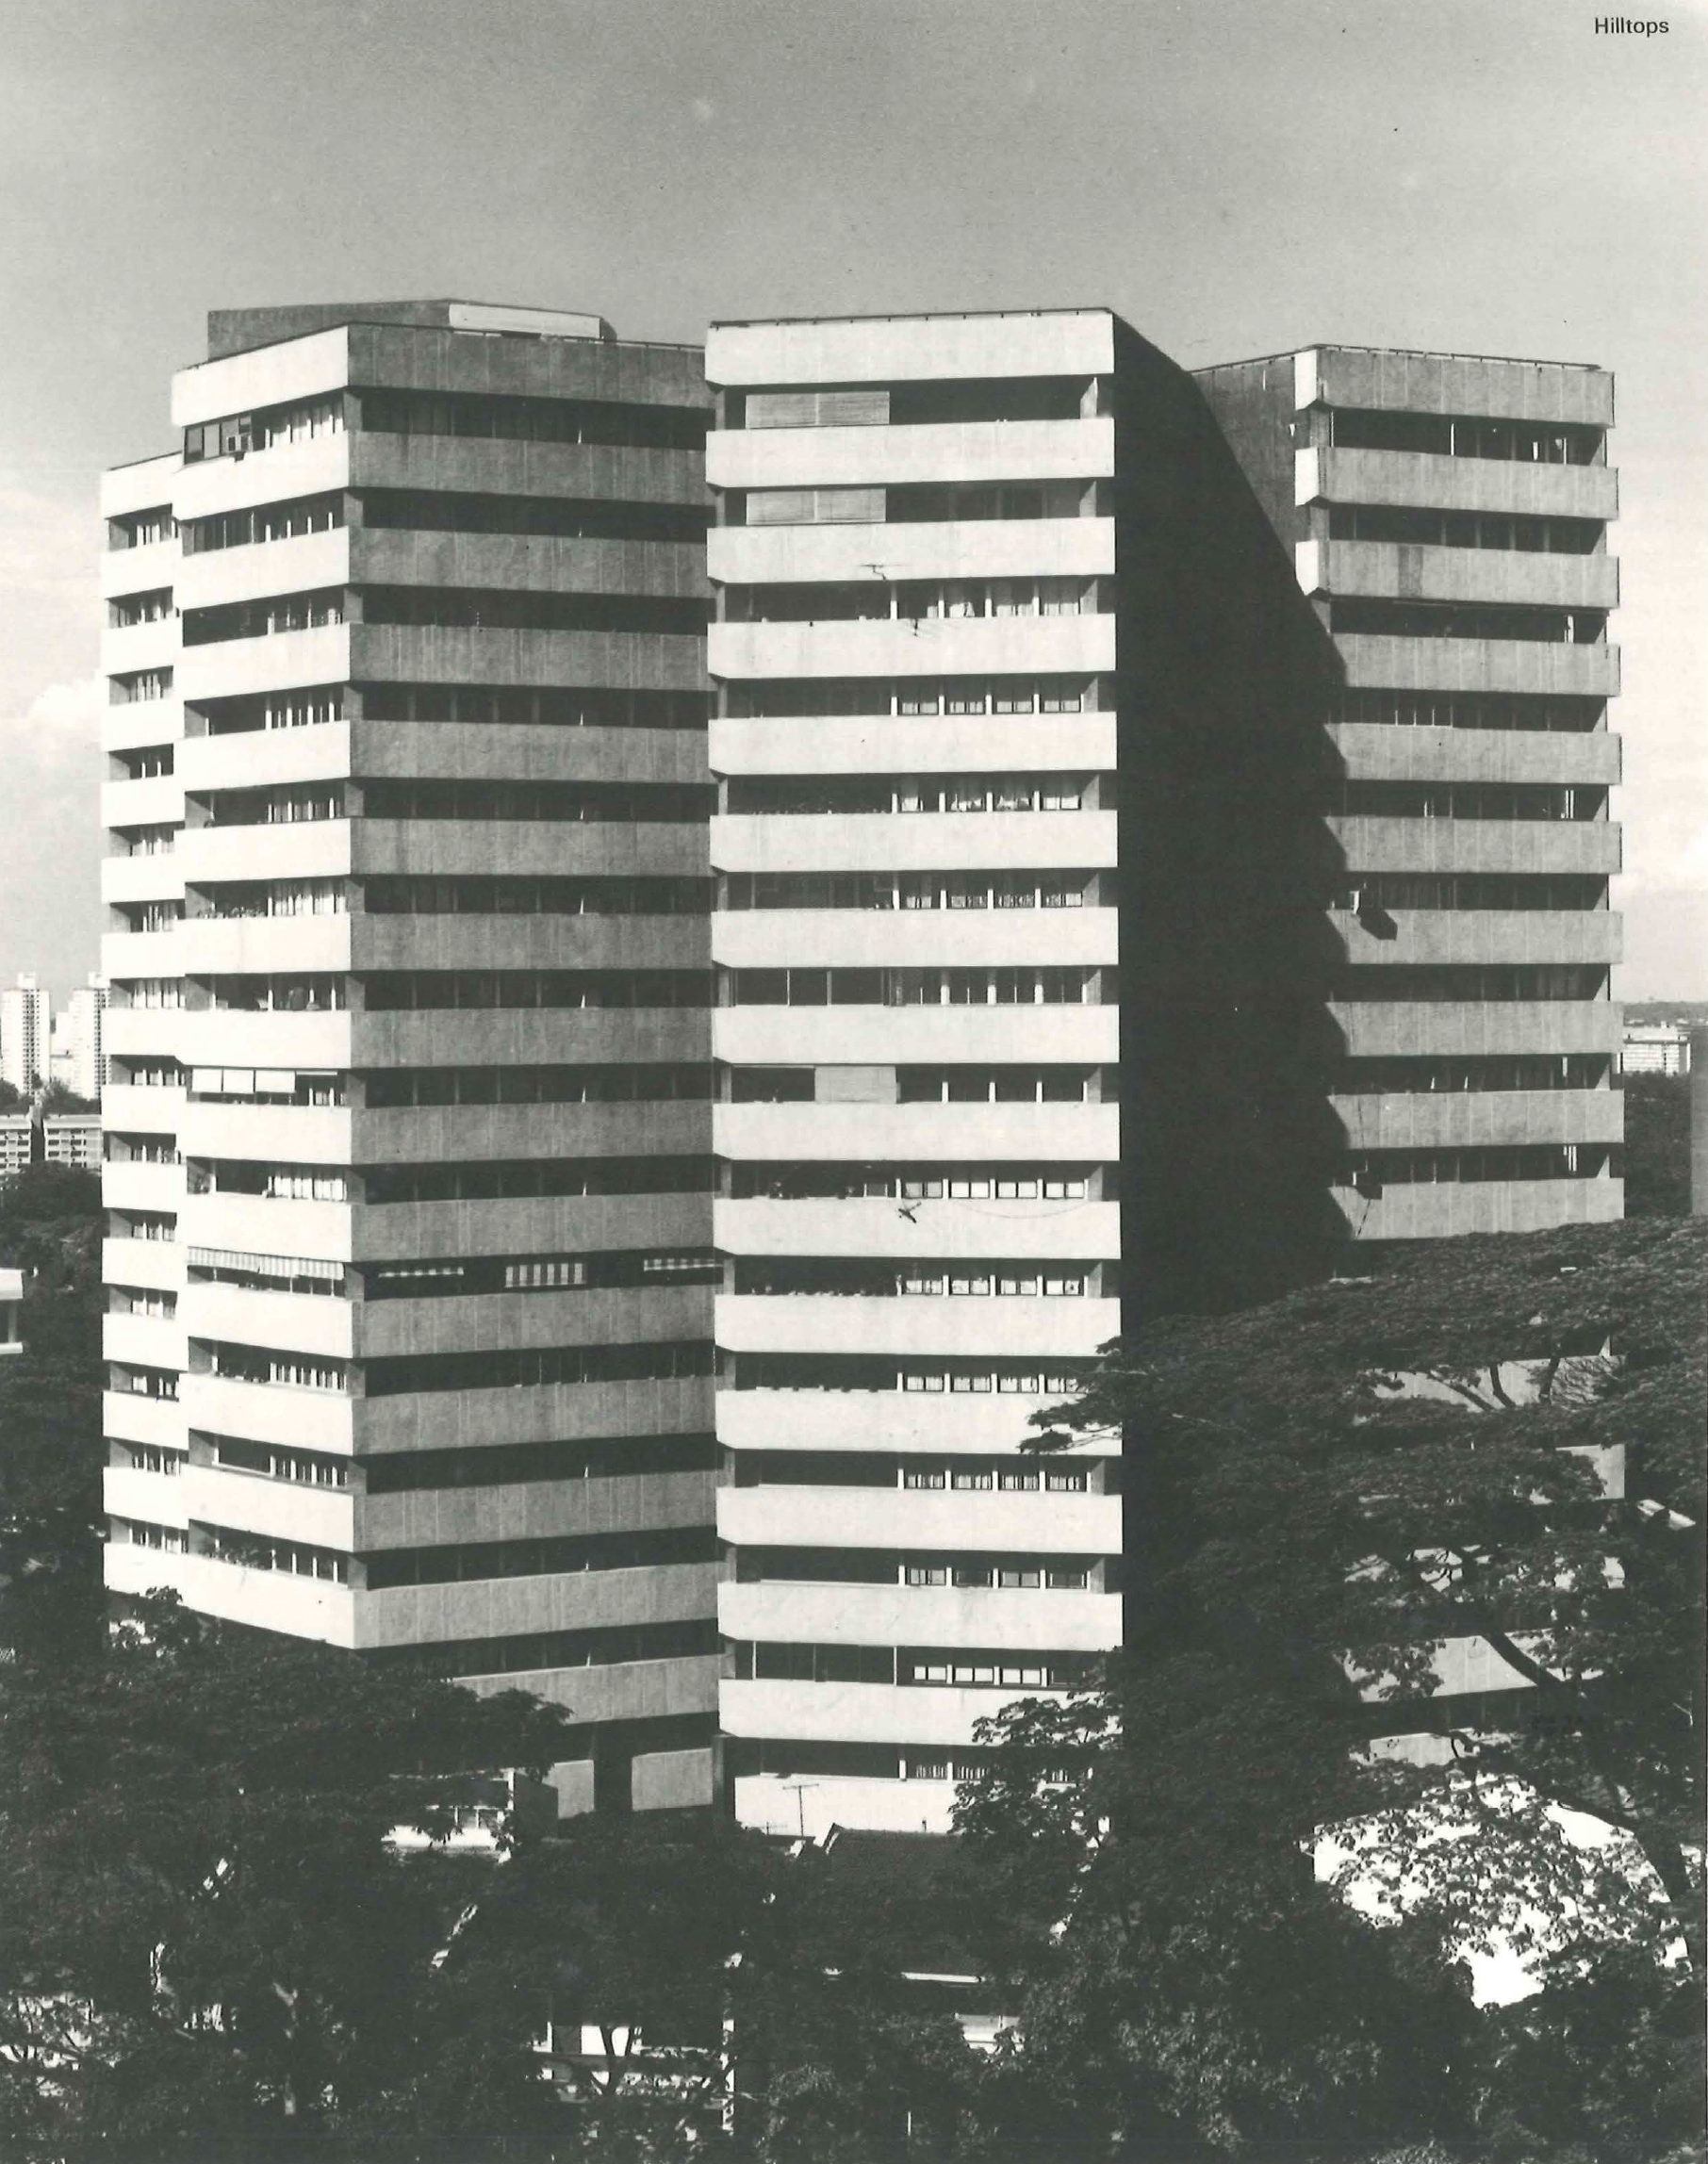 Exterior view of the Hilltops. Source: Promotional brochure of the firm in the author's collection.